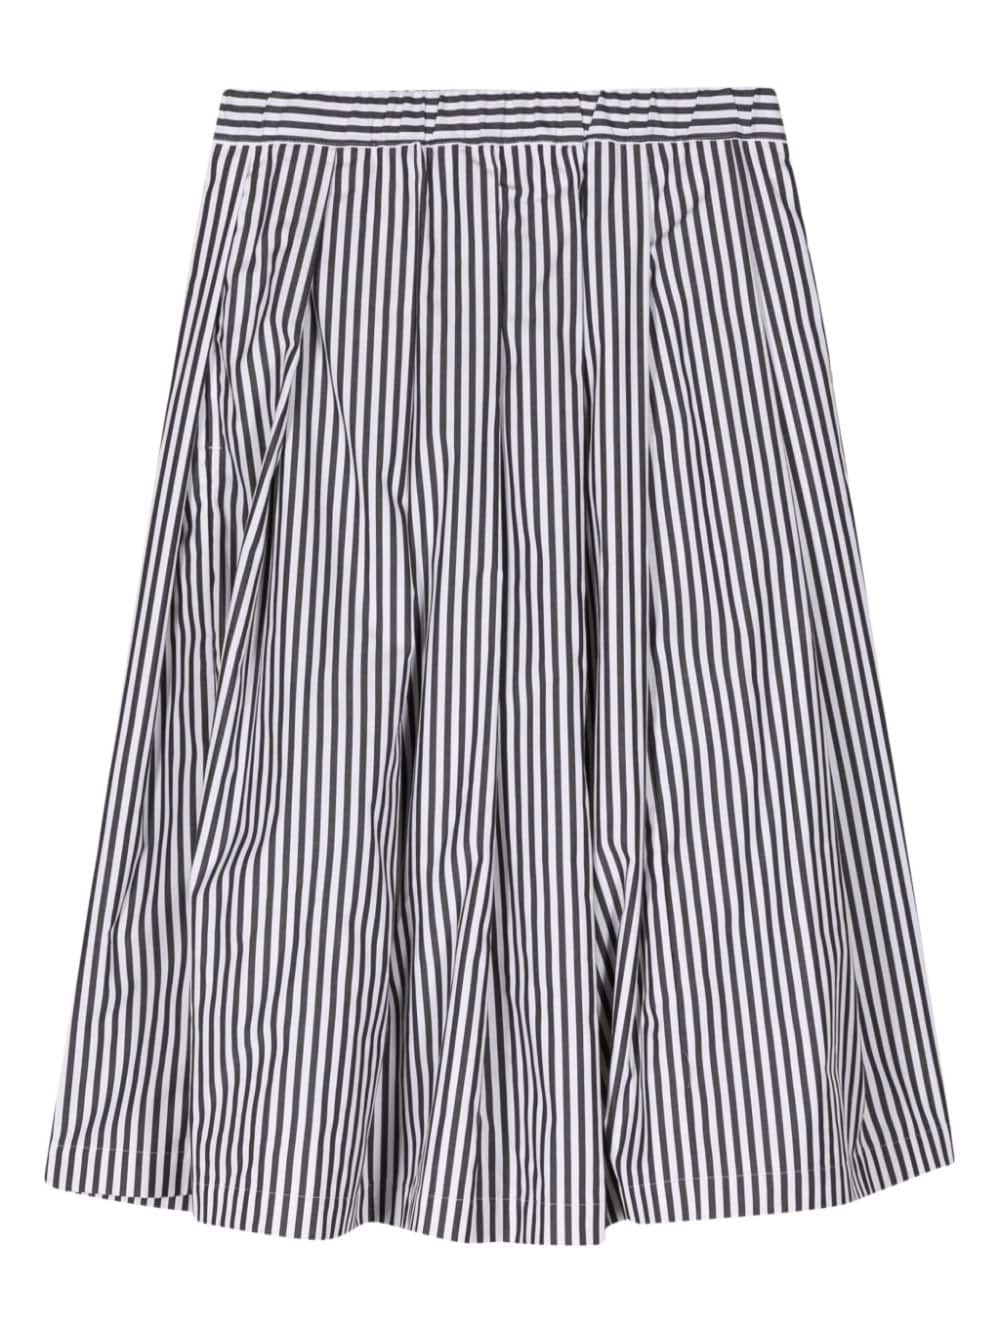 Comme Des Garcons Girl Kids' Striped Pleated Cotton Skirt In Multi